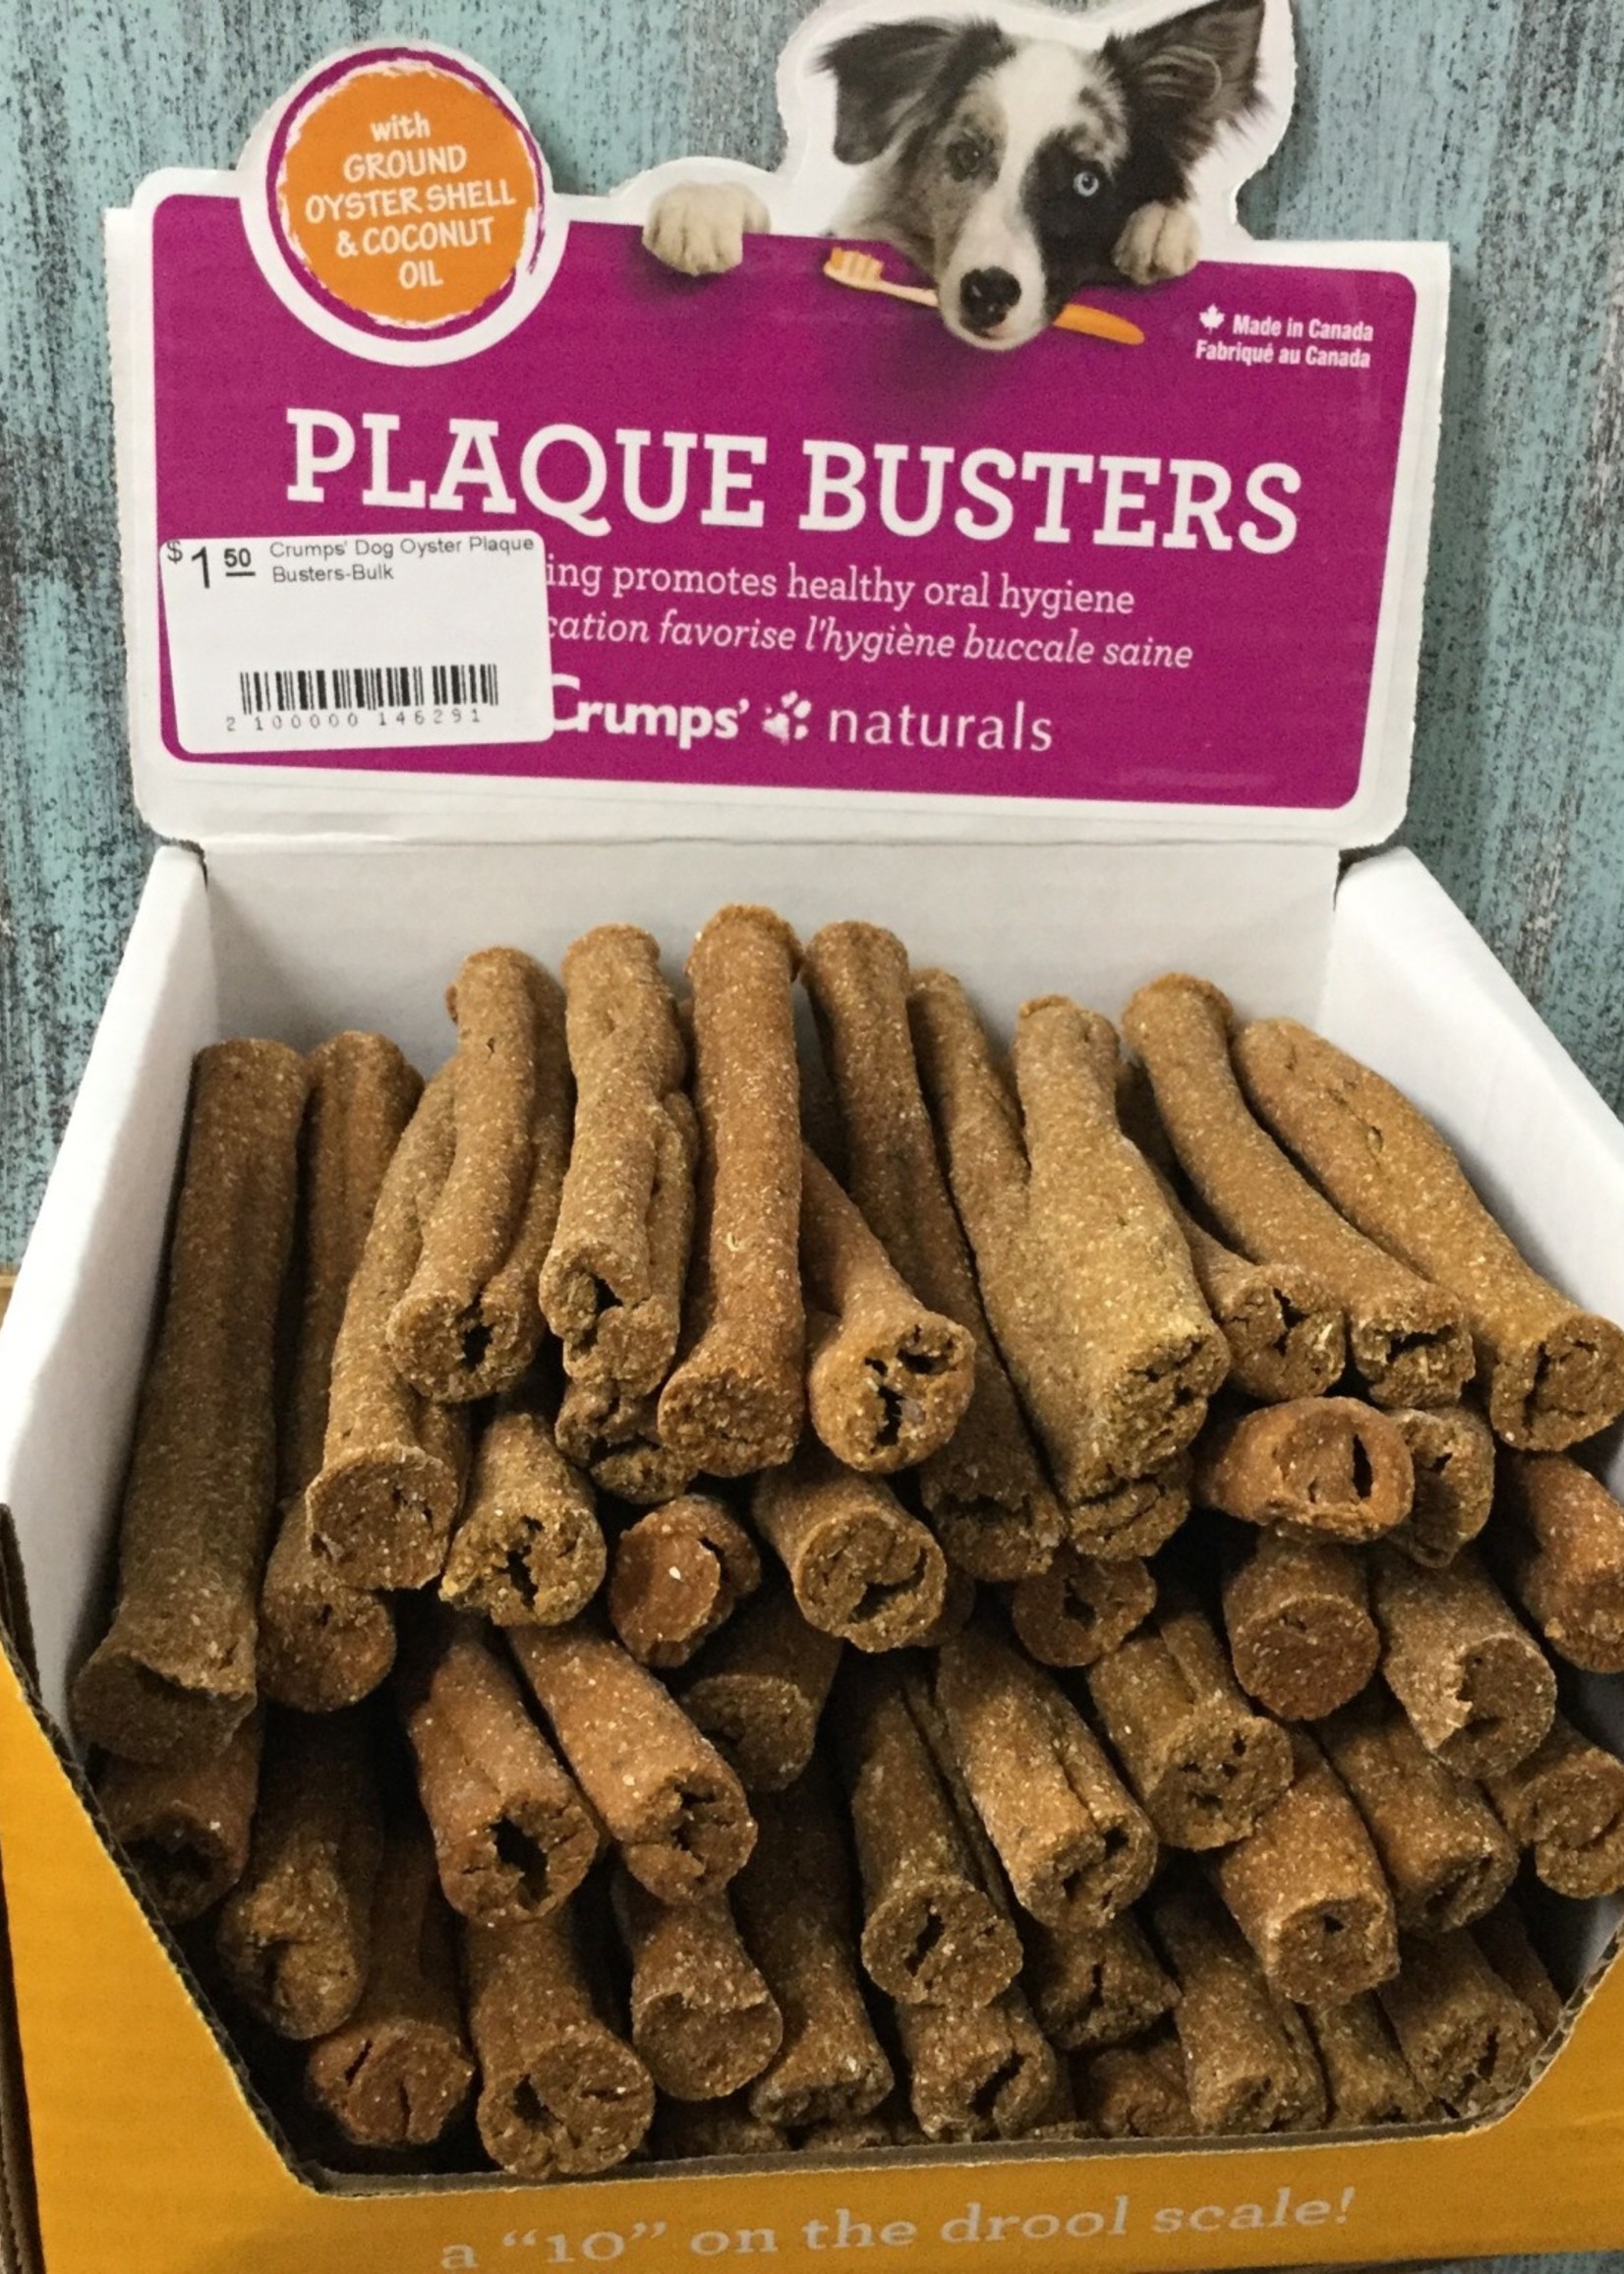 Crumps Crumps' Dog Oyster Plaque Busters-Bulk